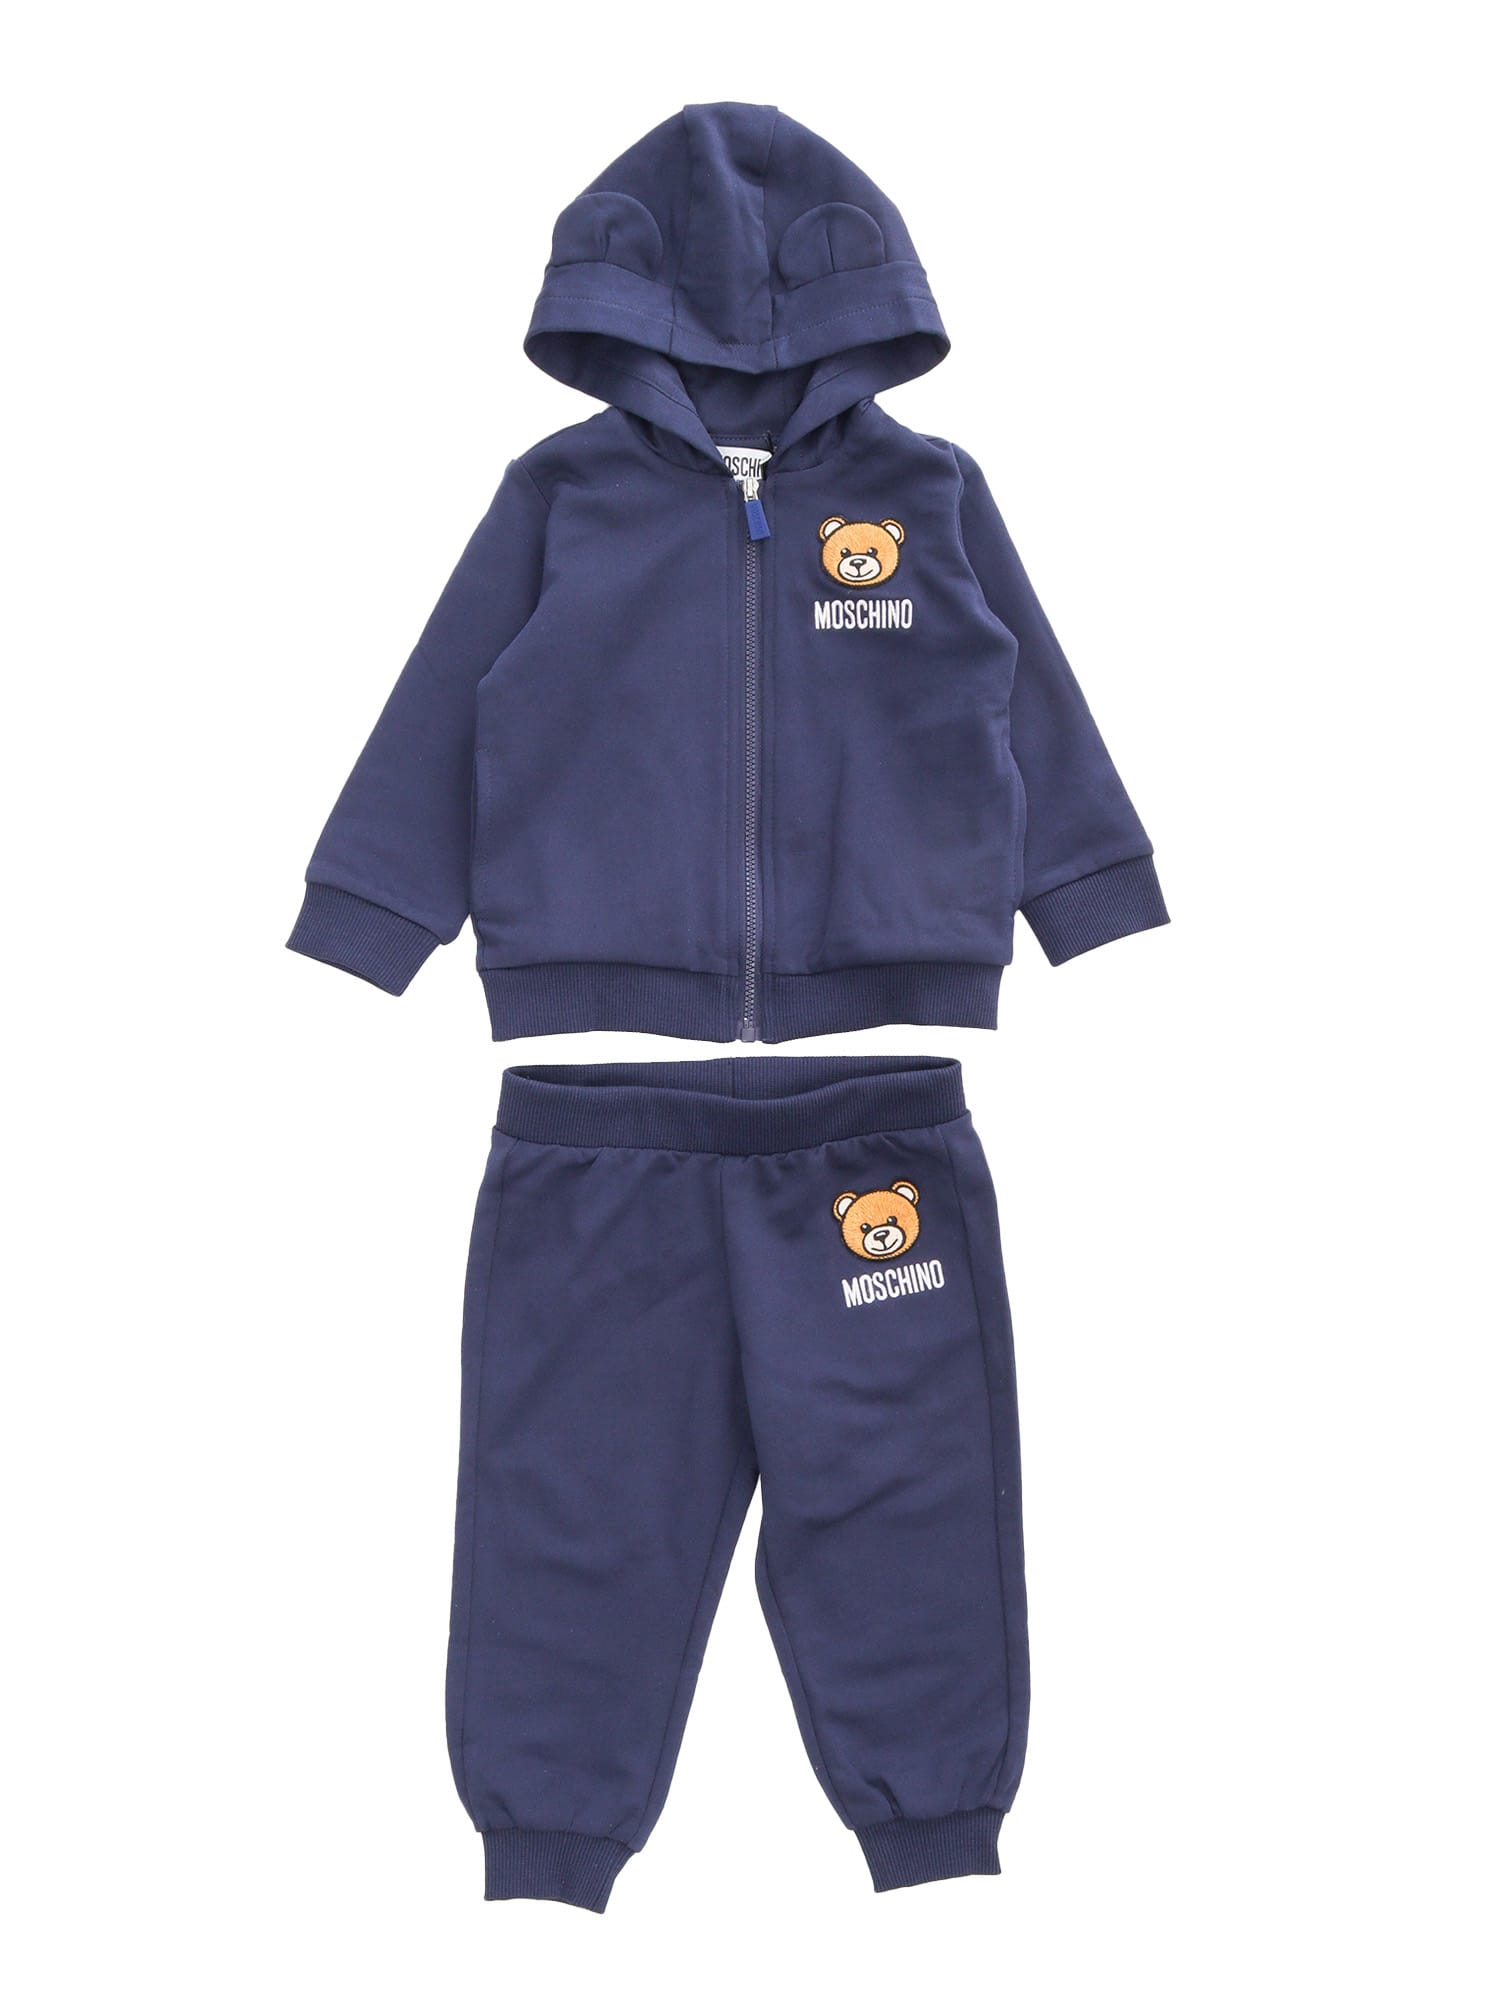 Moschino Babies' Blue 2-piece Tracksuit